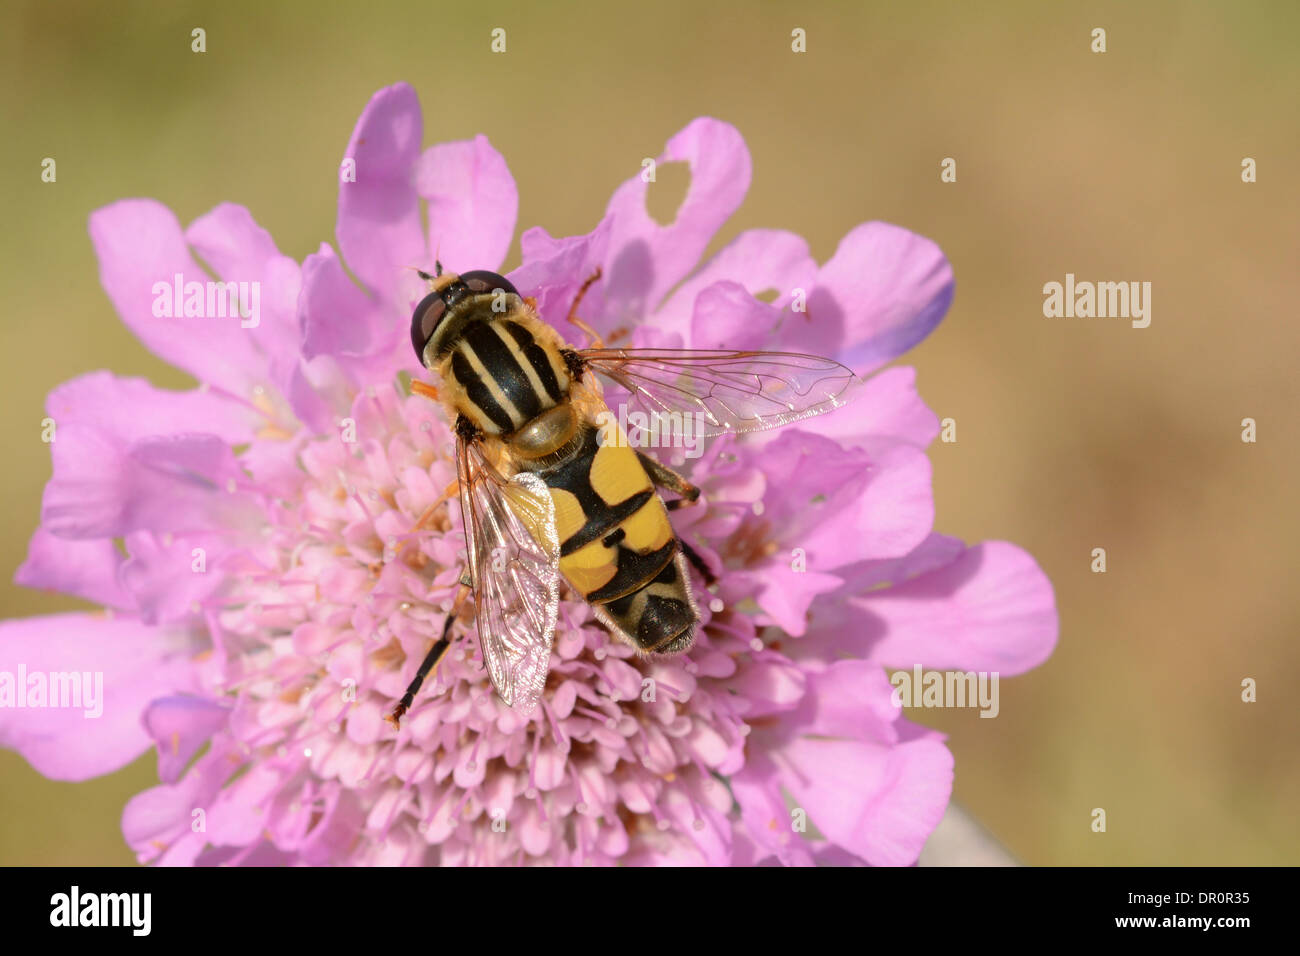 Brindled Hoverfly (Helophilus pendulus) at rest on Scabius flower, Oxfordshire, England, July Stock Photo